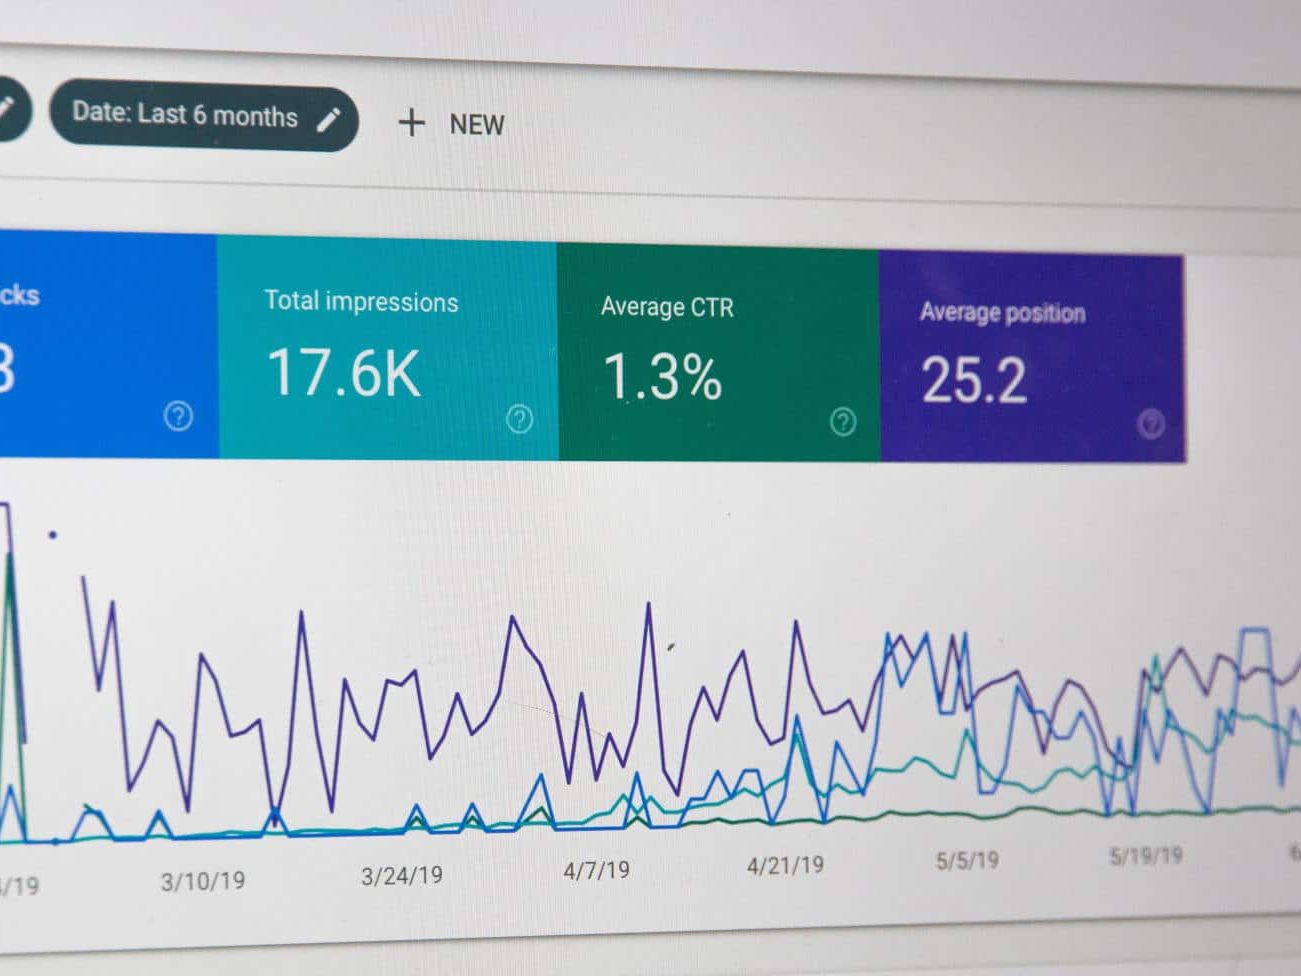 View of a Google Analytics Property on a computer monitor. Photo by Stephen Phillips - Hostreviews.co.uk on Unsplash